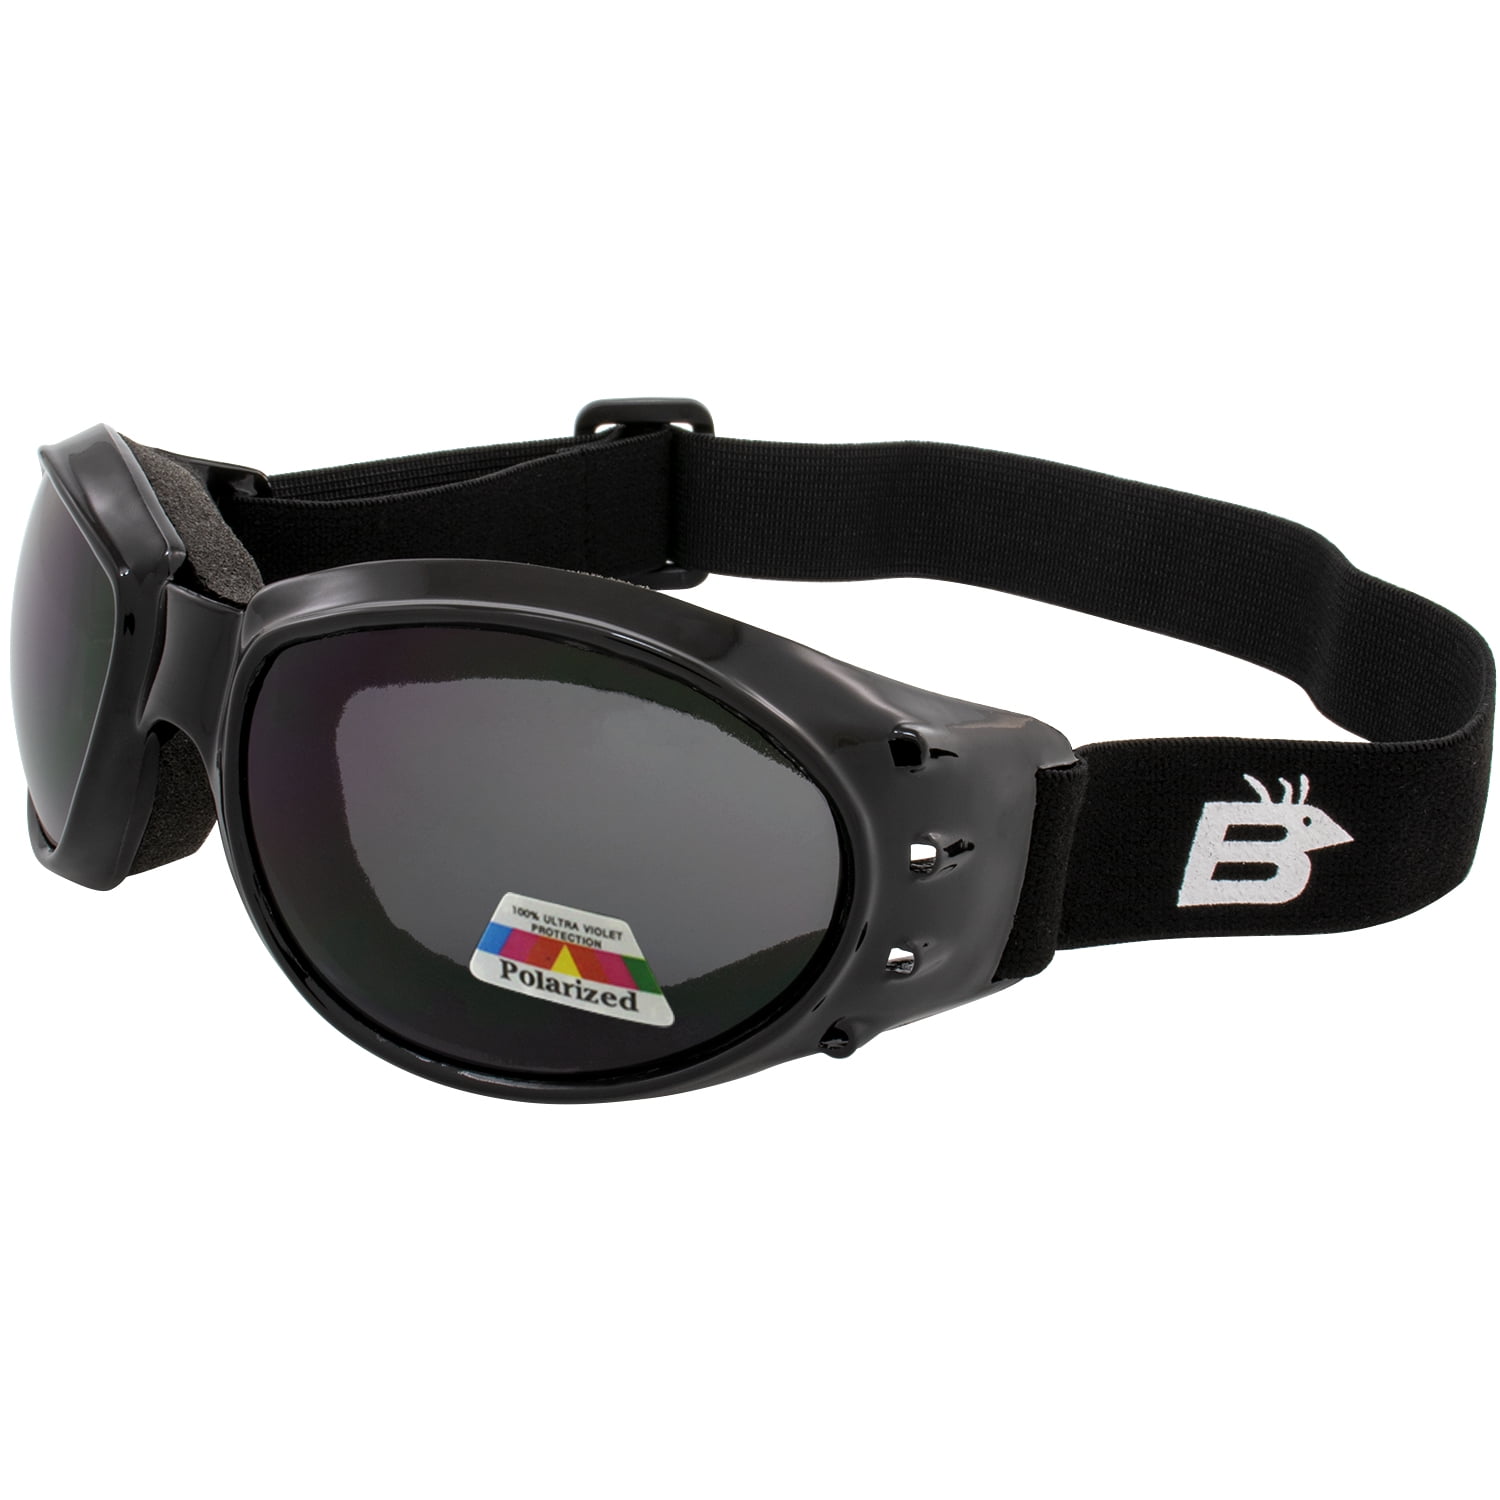 Birdz Eagle Padded Motorcycle Airsoft Goggles with Smoked Anti Fog Lenses and Soft Micro Fiber Storage Bag These Are Specially Made to Keep Dust